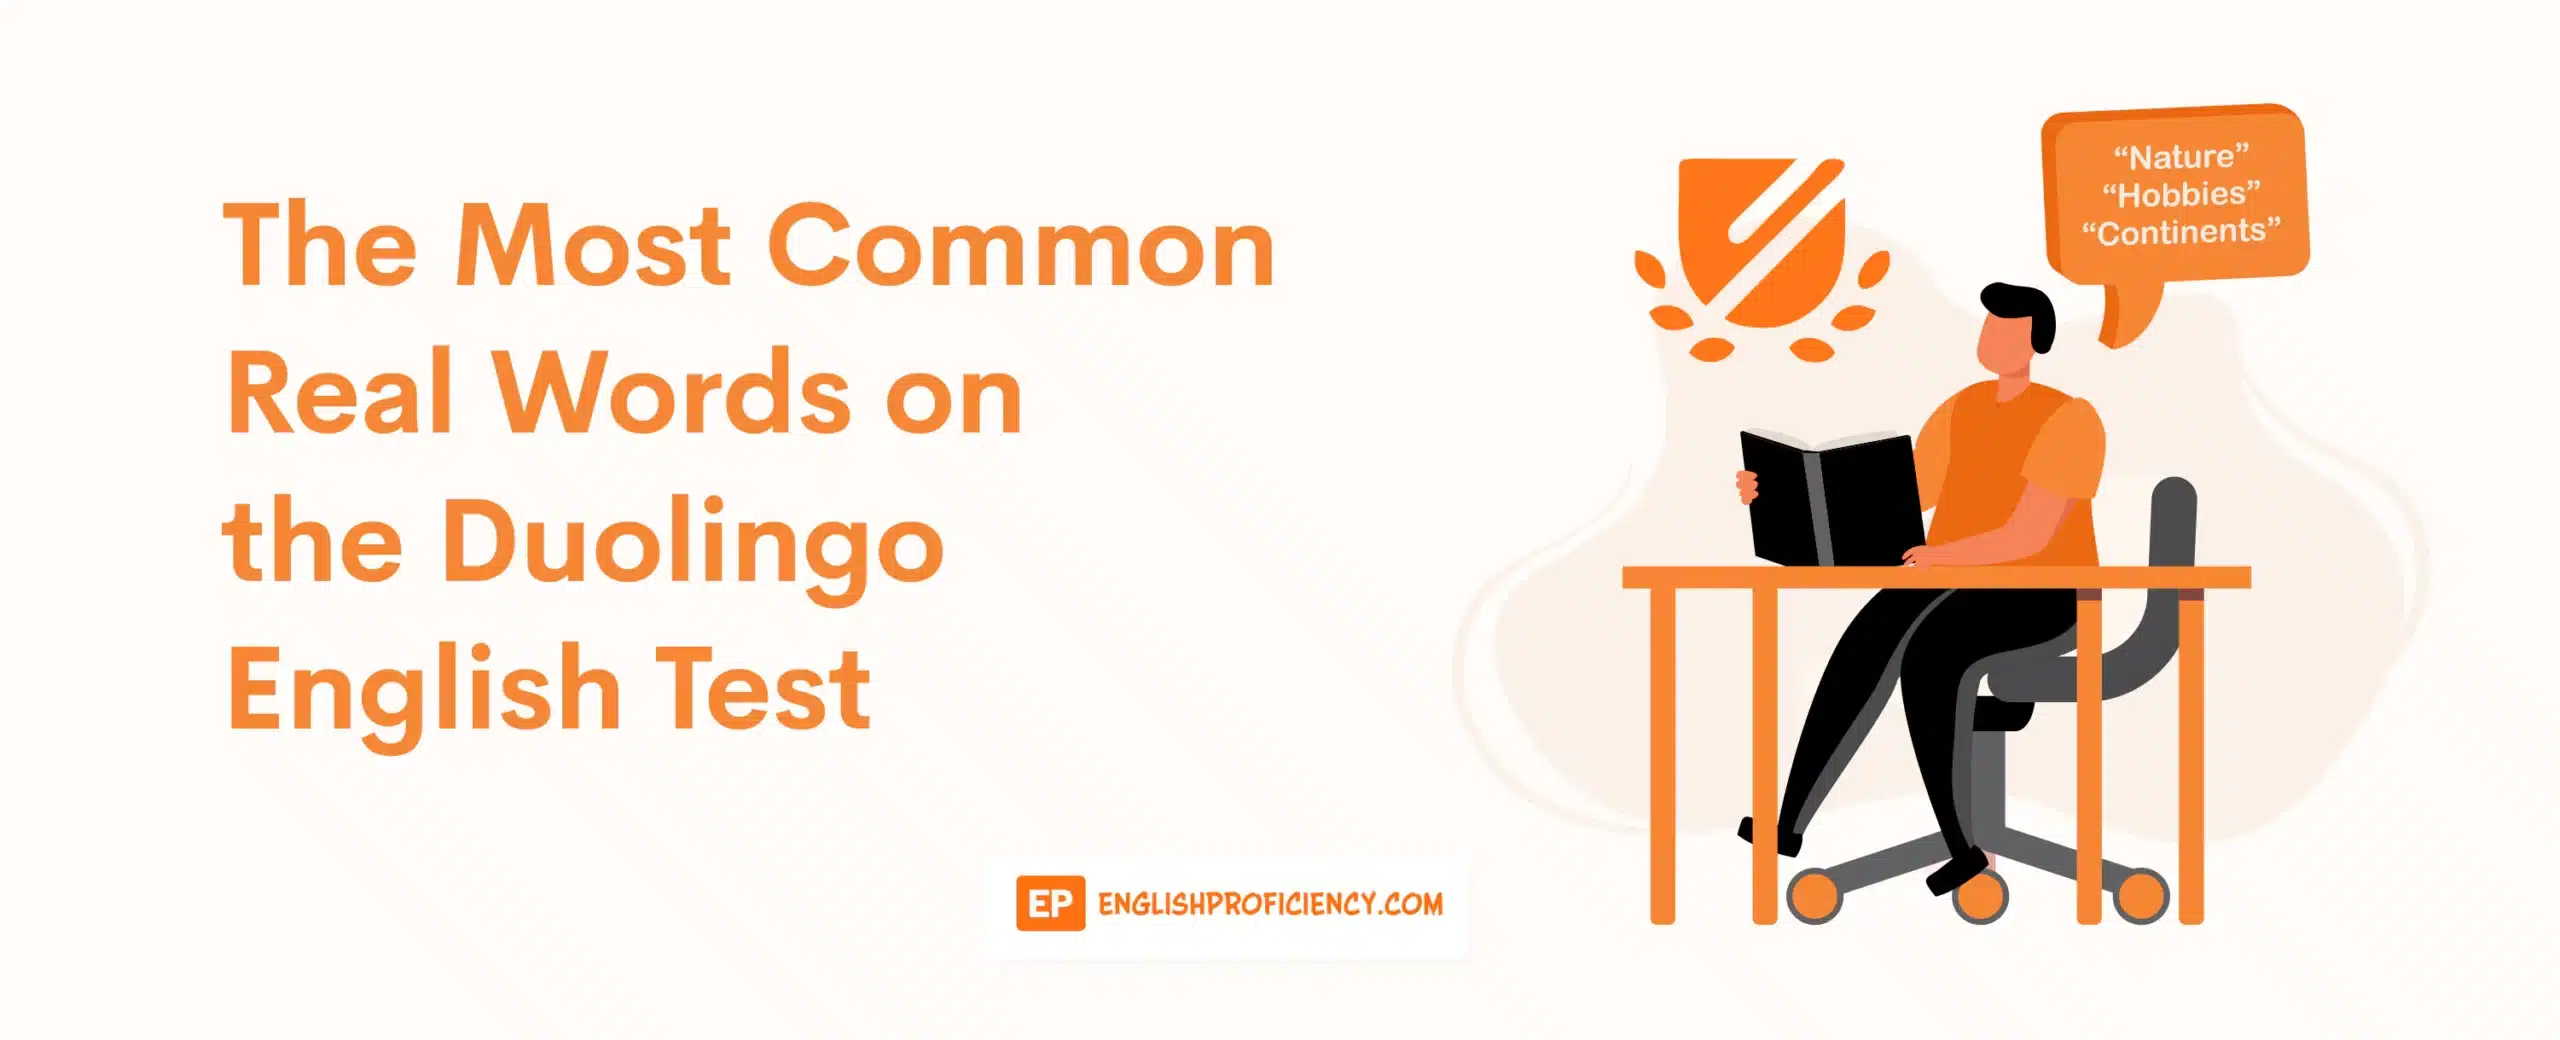 The Most Common Real Worlds on the Duolingo English Test